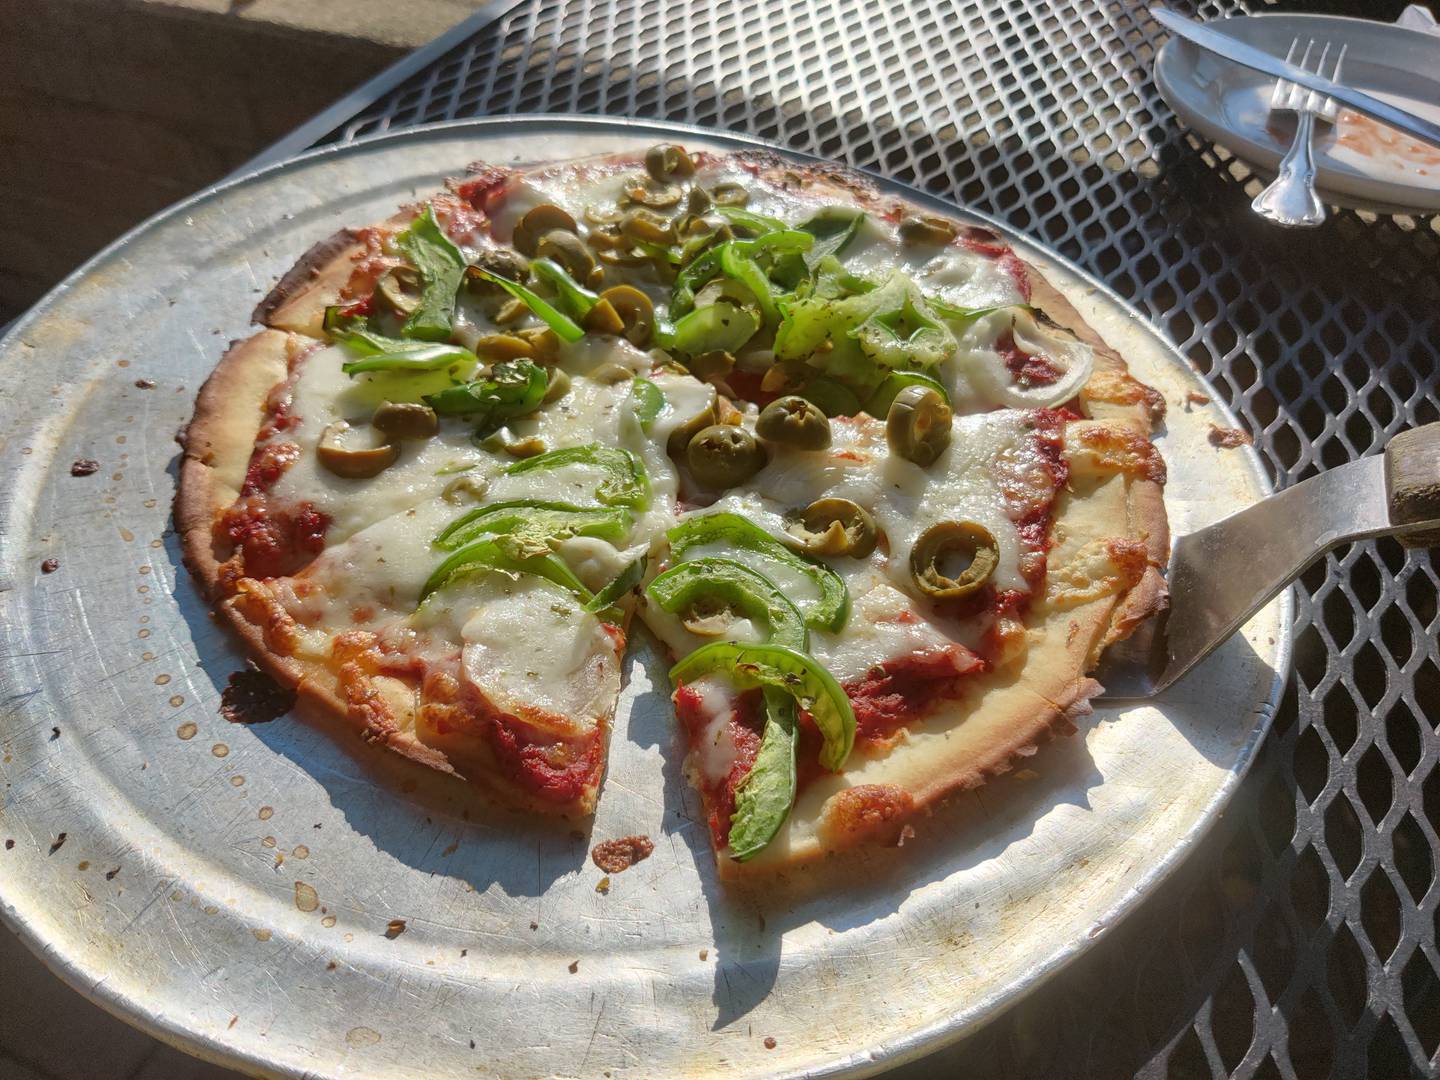 Gluten-free pizza with green pepper, onion and green olives at Pal Joey's in downtown Batavia.